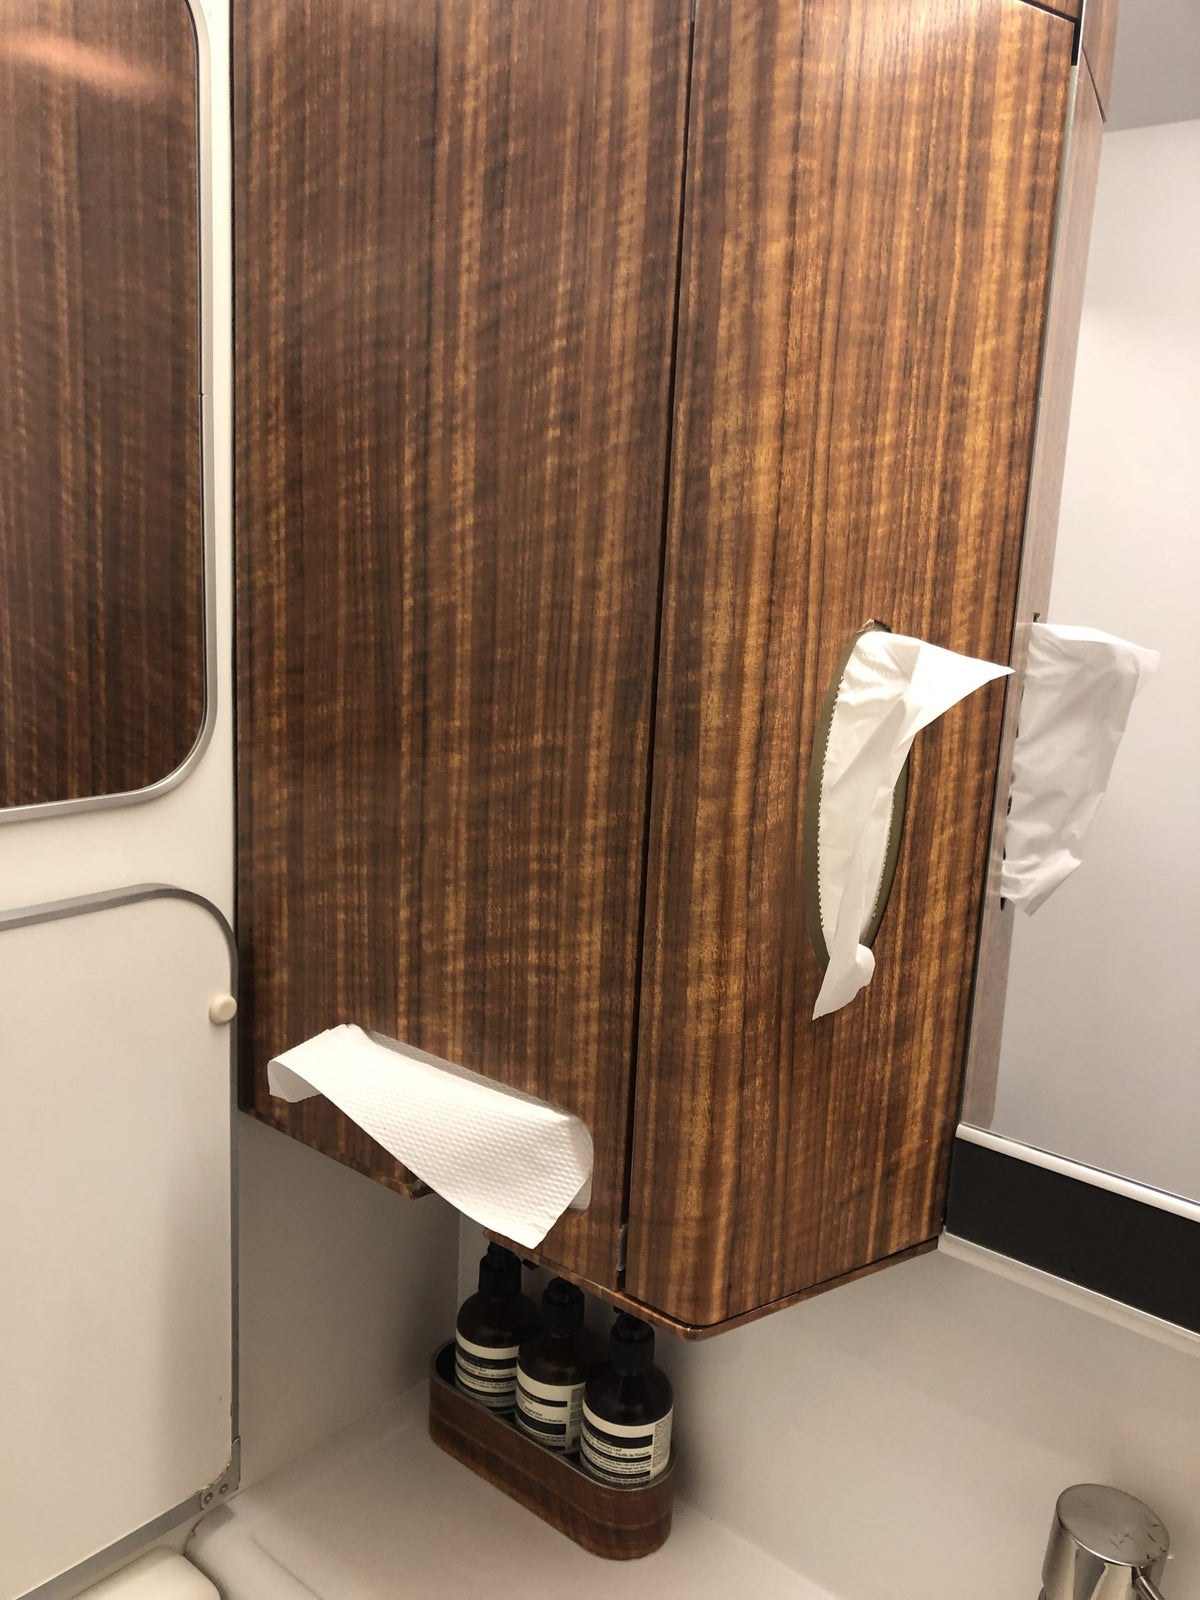 Cathay Pacific 777 first class lavatory wooden finishes